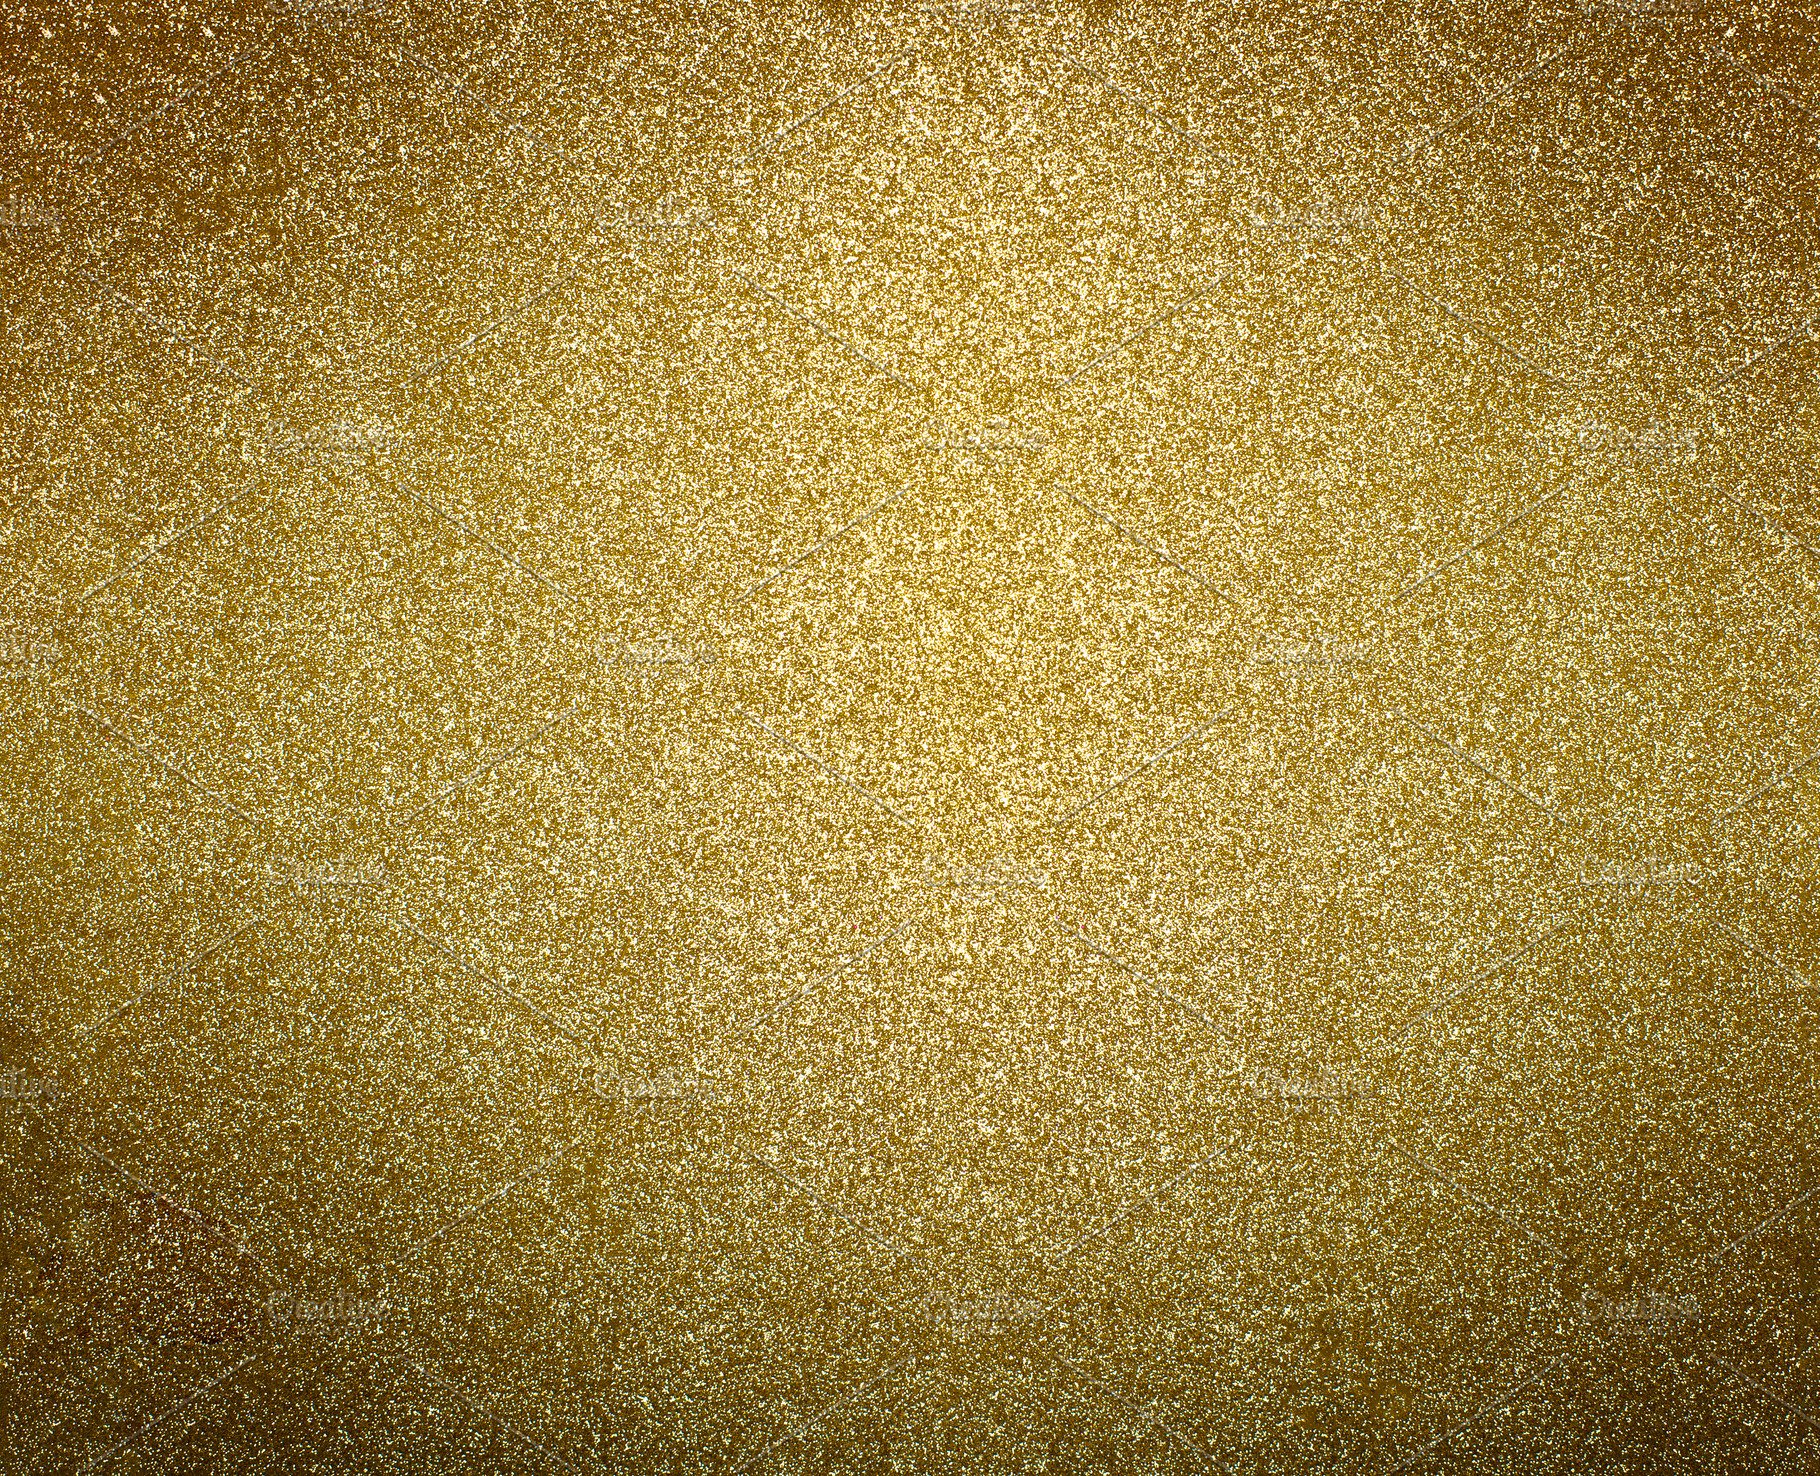 Gold Background Golden Glitter Or S High Quality Abstract Stock